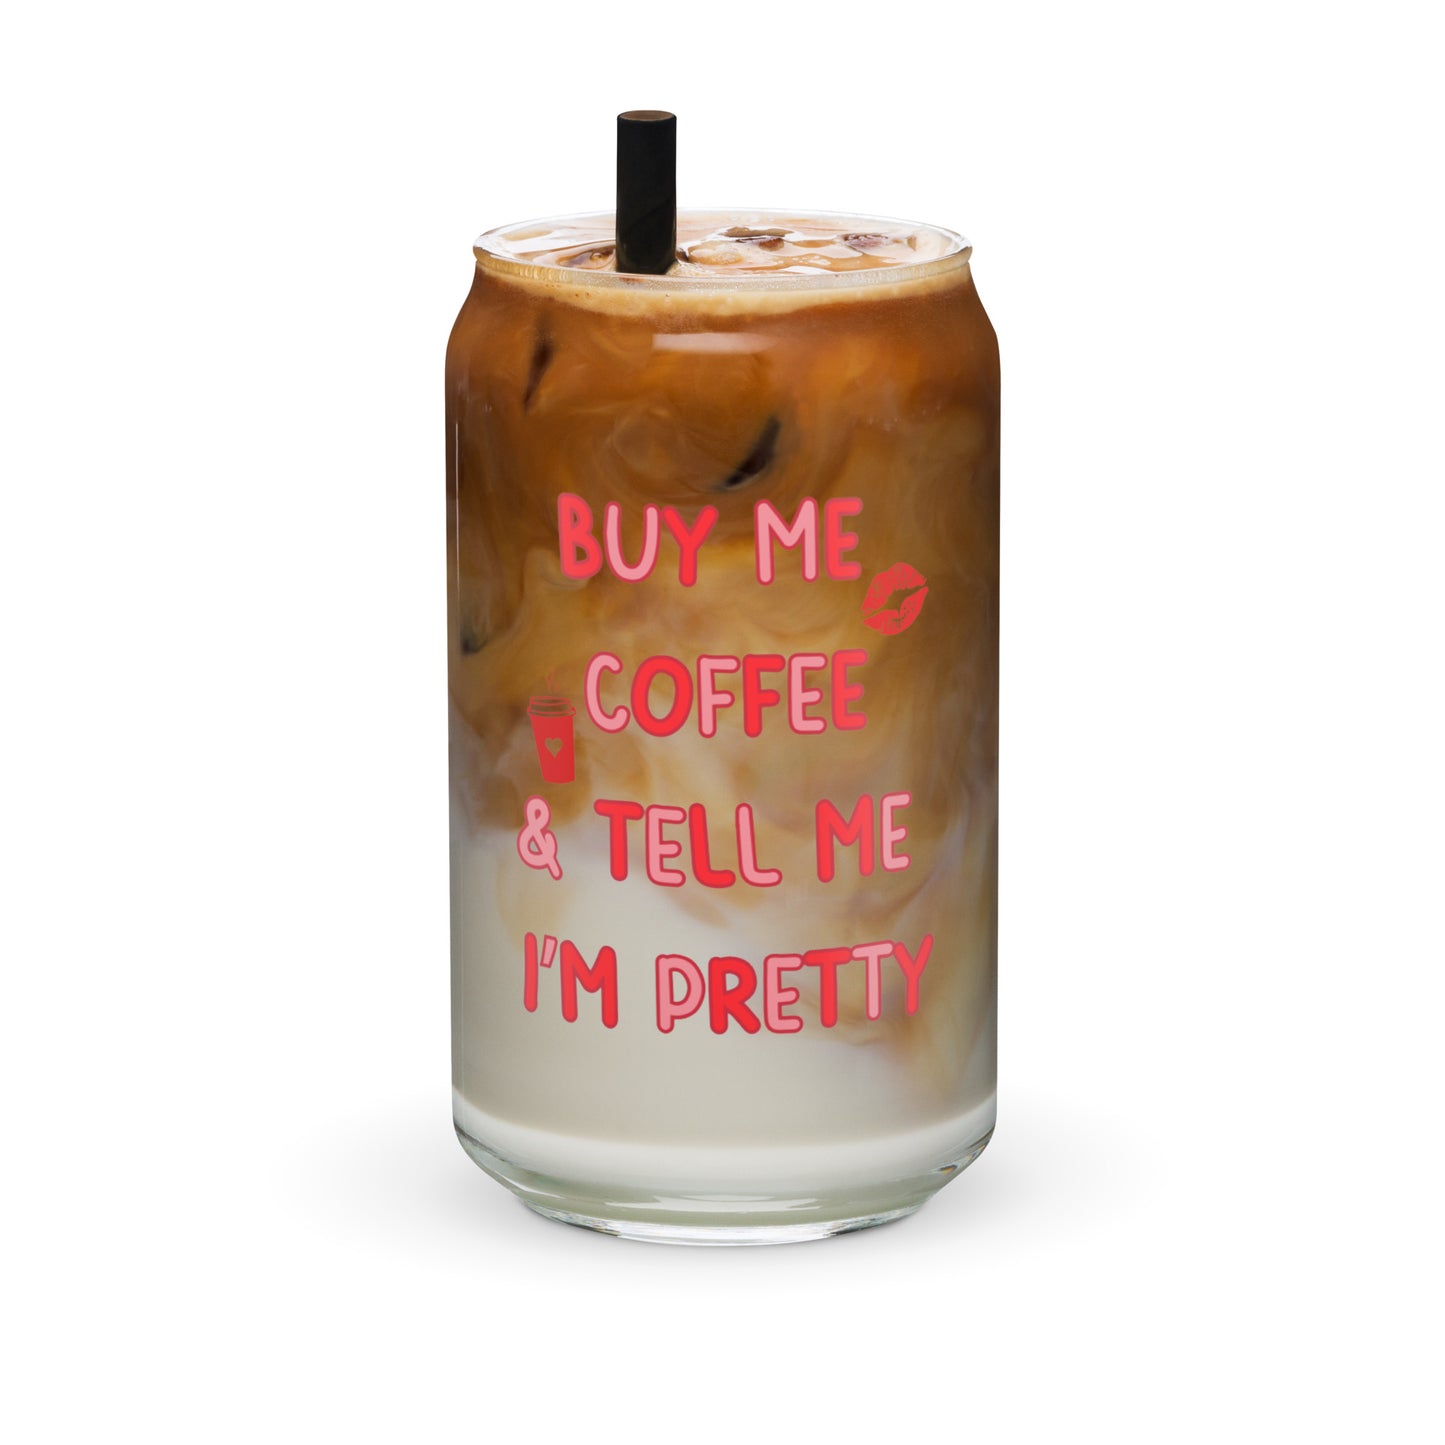 Buy Me Coffee and Tell Me I'm Pretty - Can-Shaped Glass,  by The Banannie Diaries - Volume: 16 oz. (473 ml), Glassware, Houseware